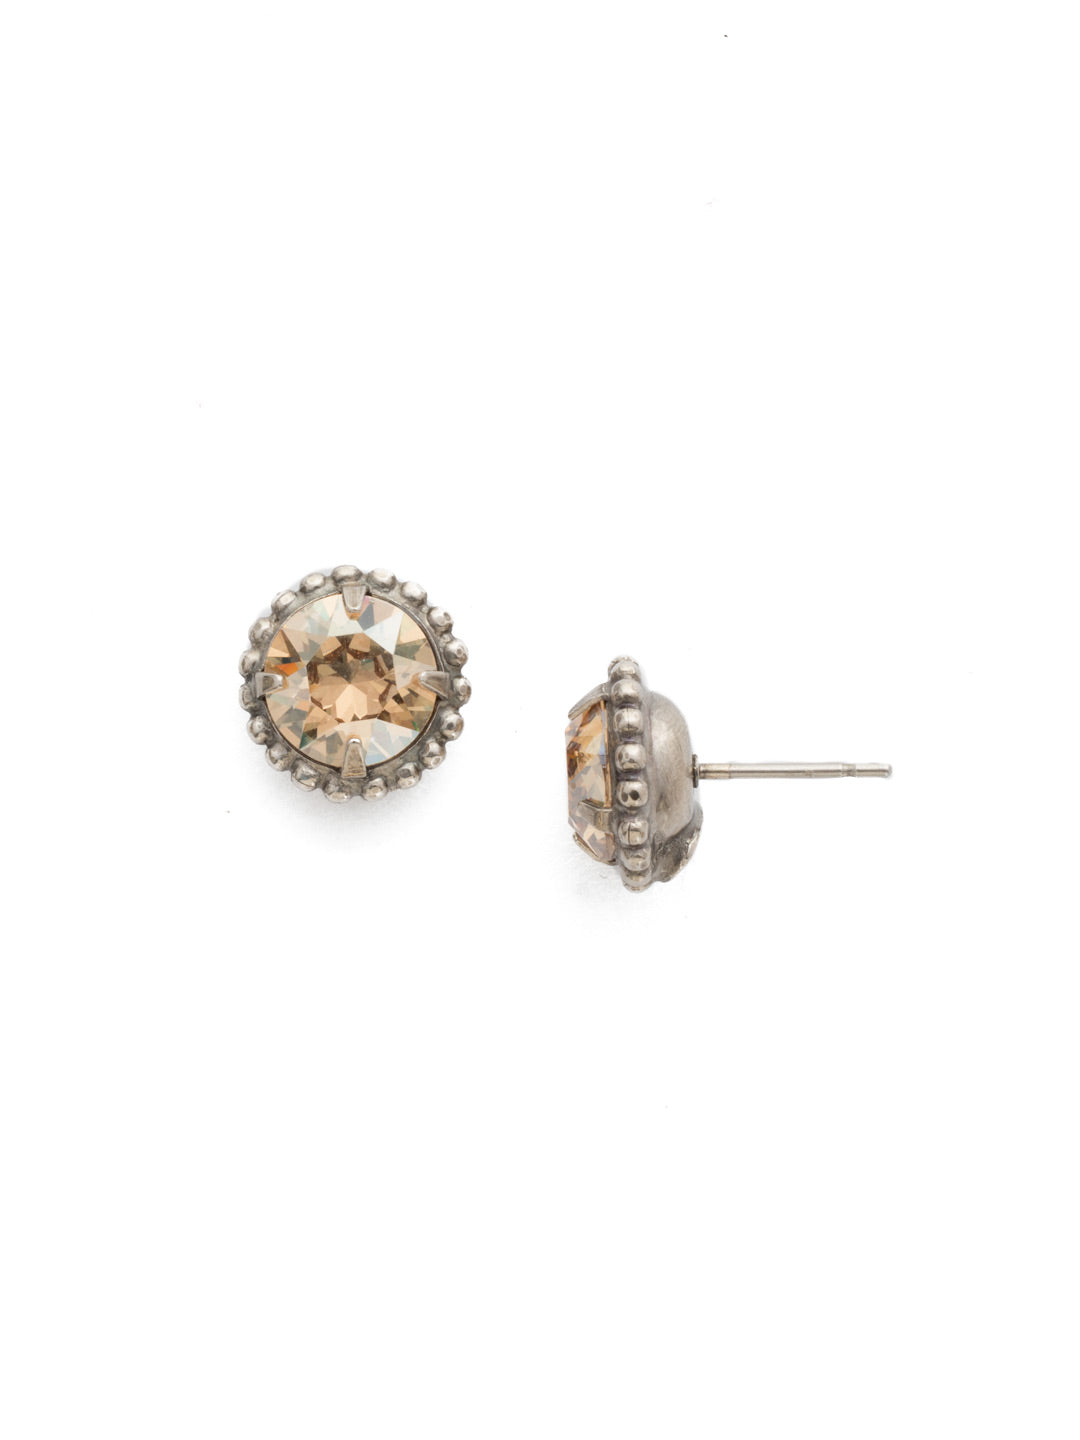 Simplicity Stud Earrings - EBY38ASDCH - <p>A timeless classic, the Simplicity Stud Earrings feature round cut crystals in a variety of colors; accented with a halo of metal beaded detail. Need help picking a stud? <a href="https://www.sorrelli.com/blogs/sisterhood/round-stud-earrings-101-a-rundown-of-sizes-styles-and-sparkle">Check out our size guide!</a> From Sorrelli's Dark Champagne collection in our Antique Silver-tone finish.</p>